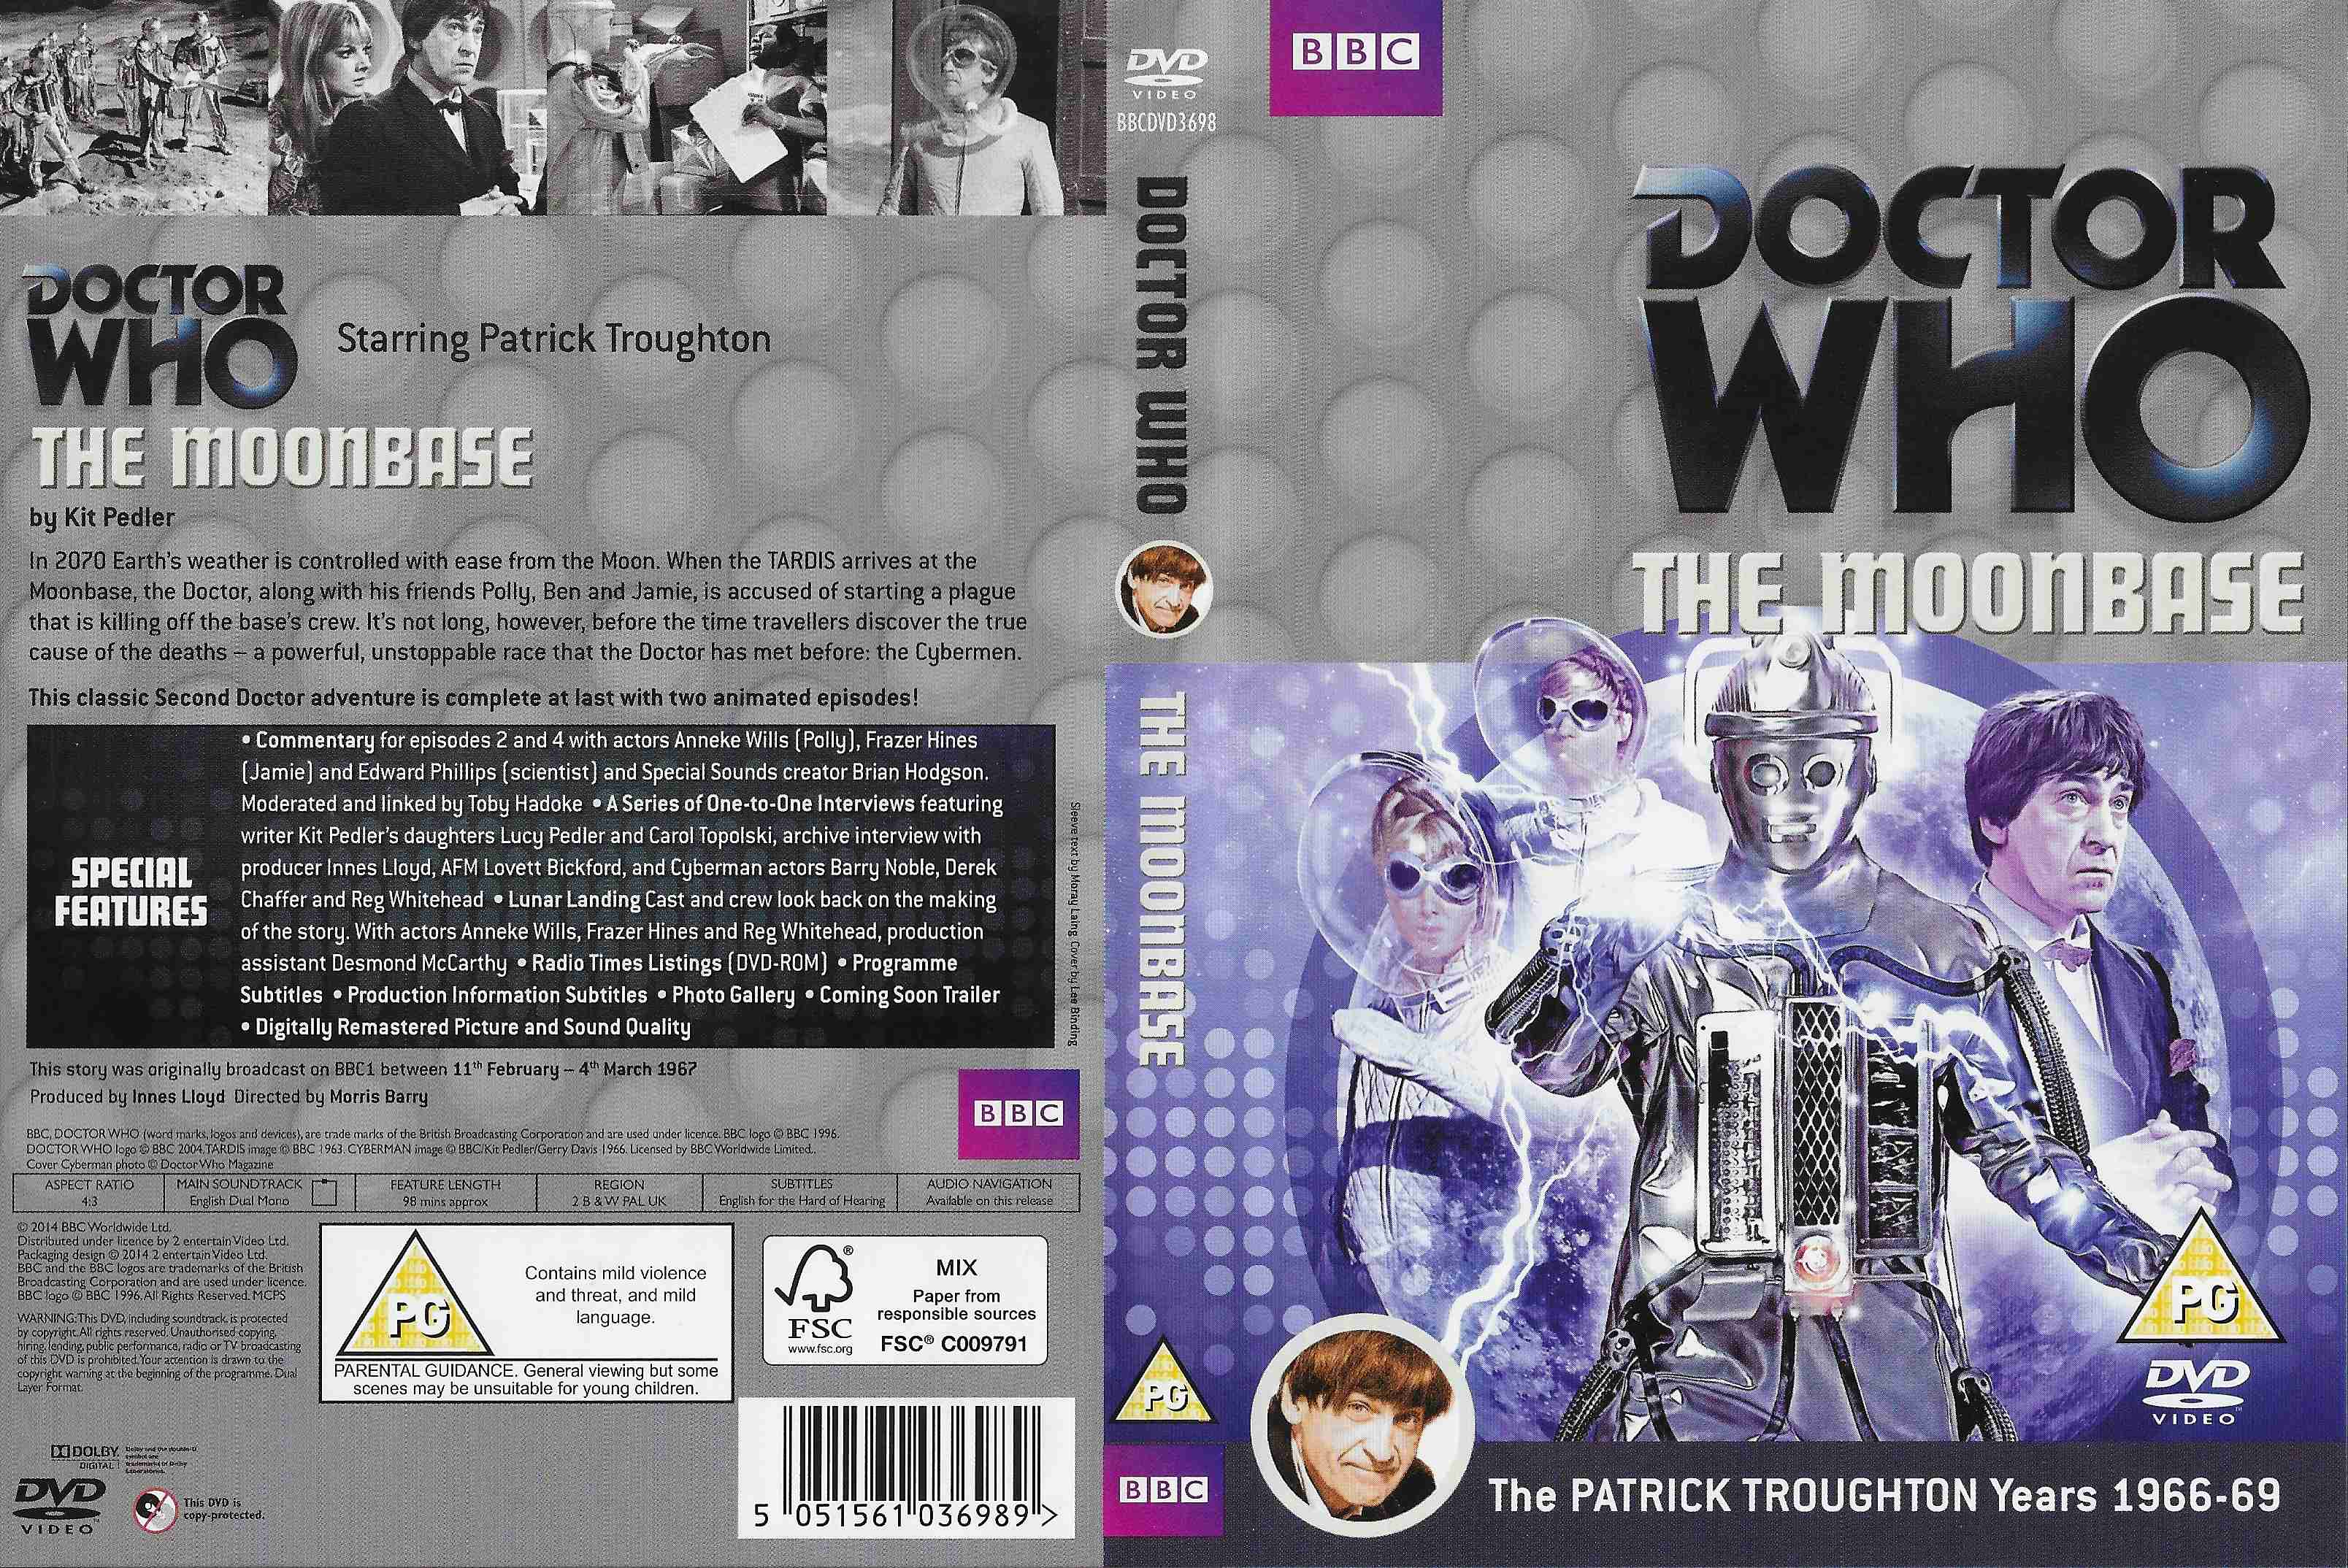 Picture of BBCDVD 3698 Doctor Who - The moonbase by artist Kit Pedler from the BBC records and Tapes library